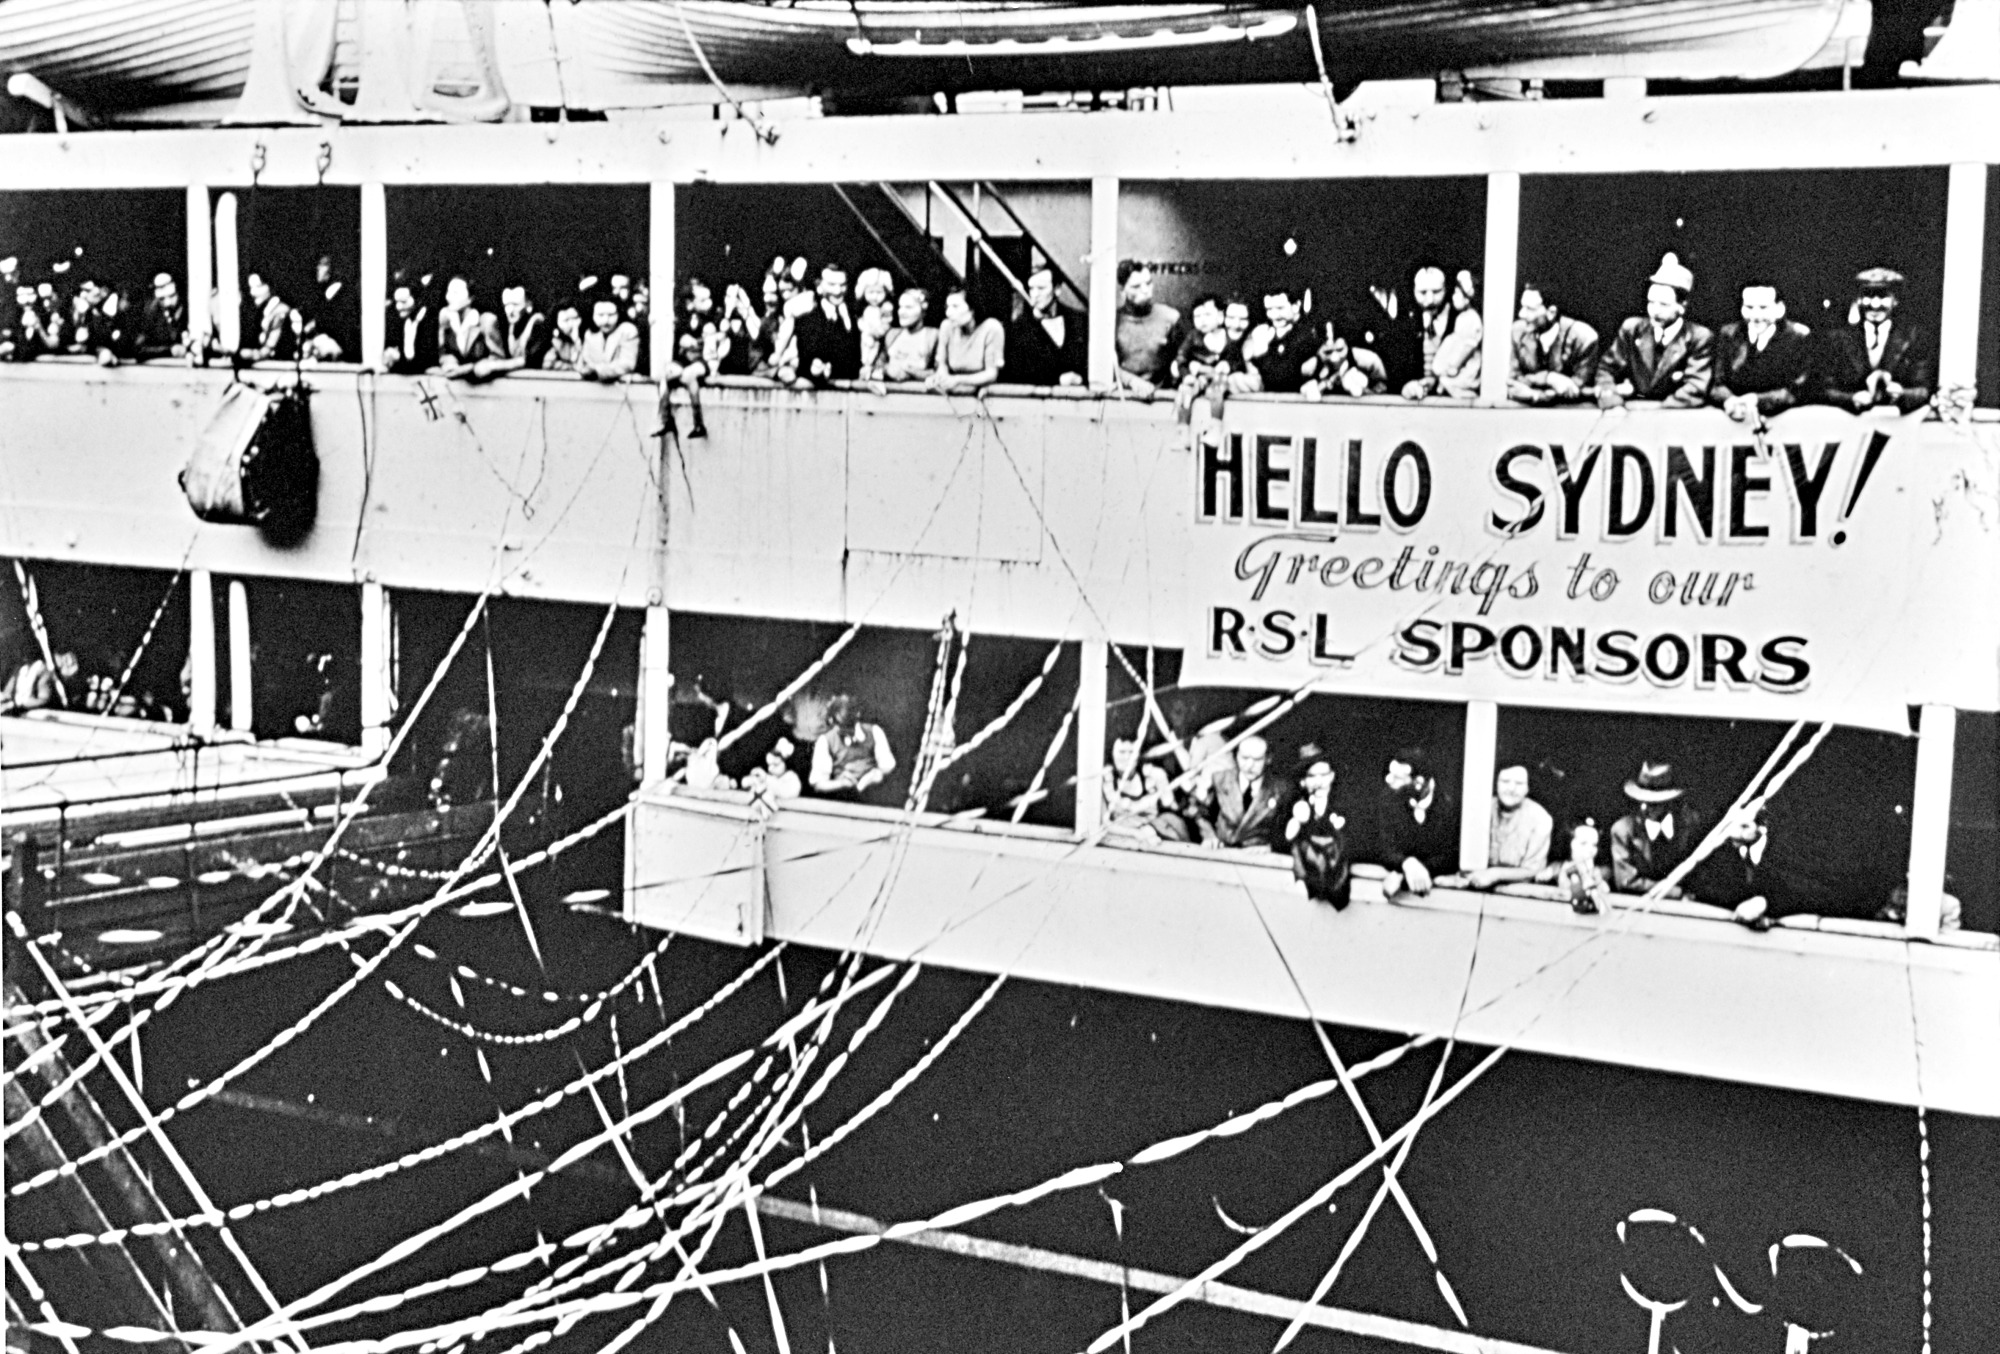 Returned Services League sponsored migrants arrive in Sydney, 1947.